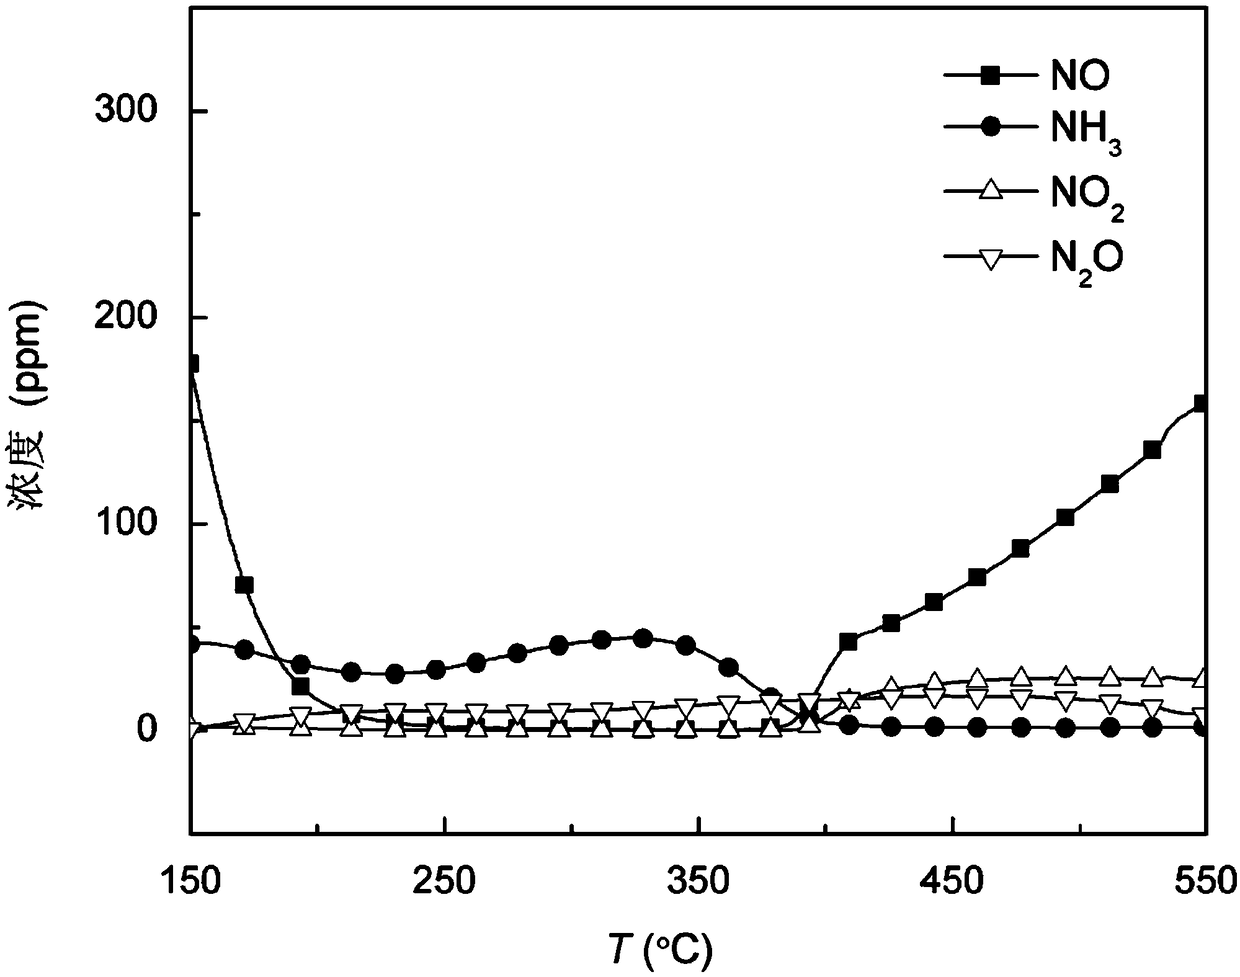 Impregnation-coating method for rapidly preparing Cu-SSZ-13 monolithic catalyst and application of monolithic catalyst